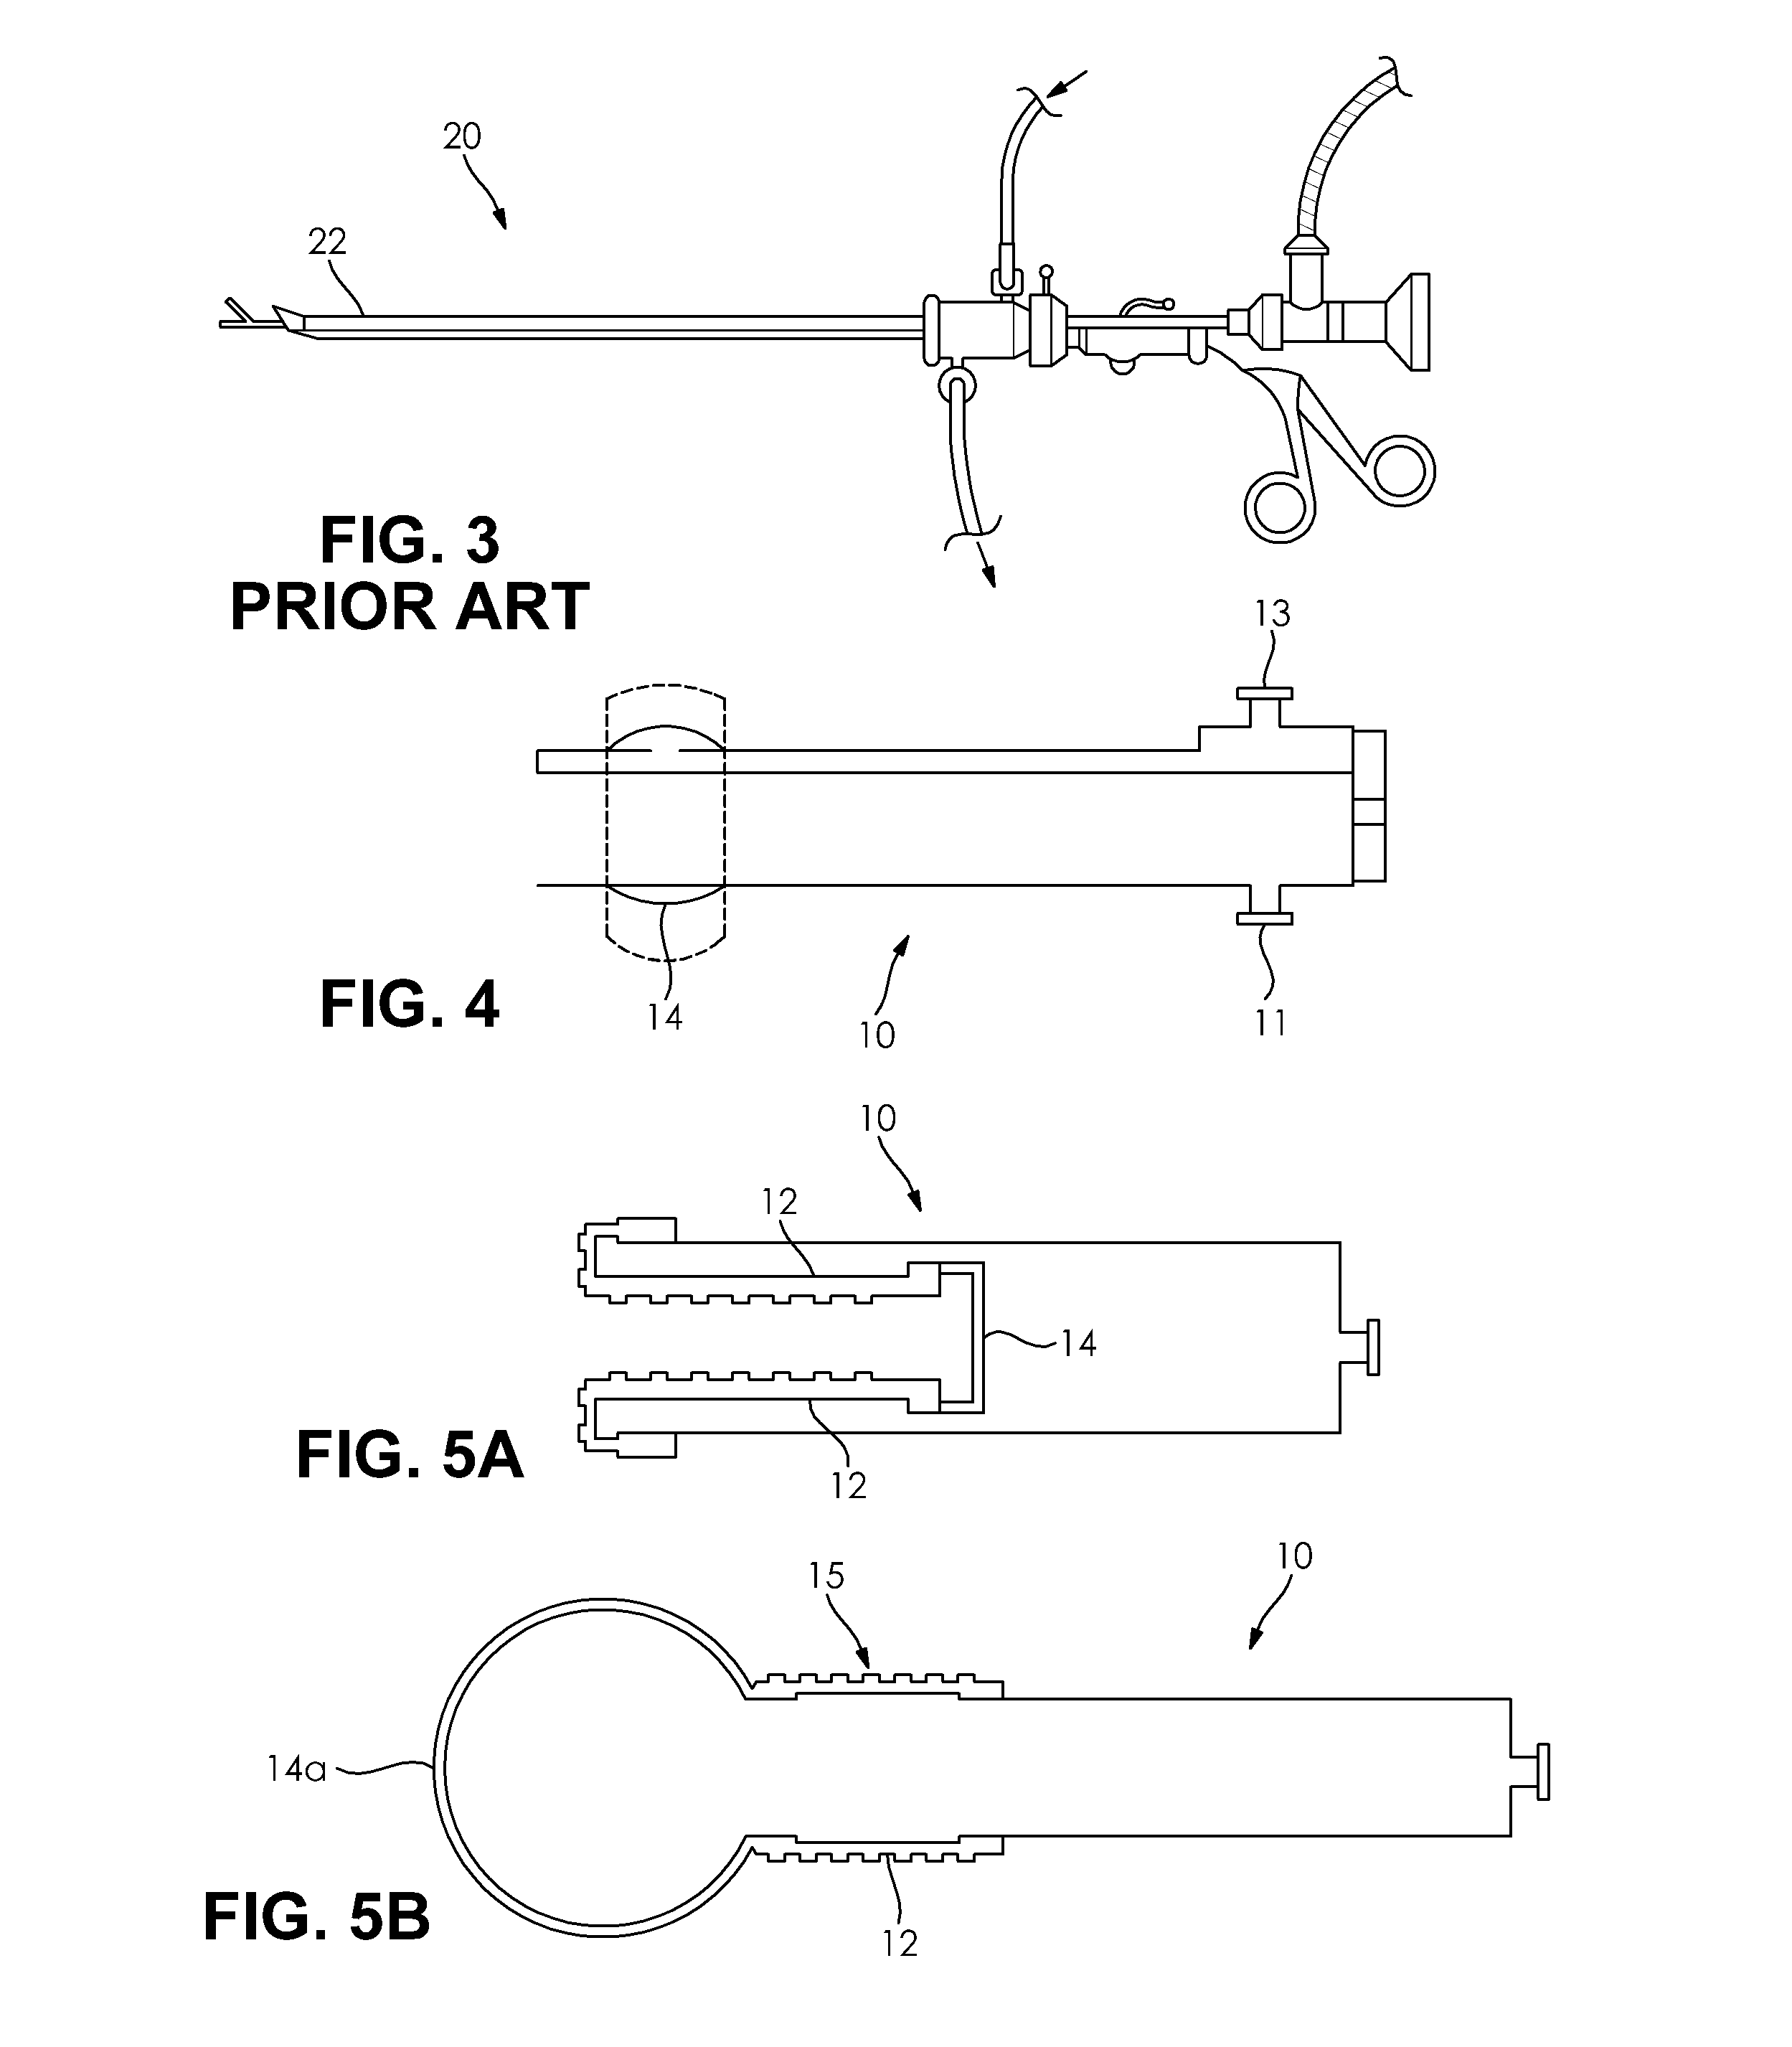 Methods and devices for fallopian tube diagnostics